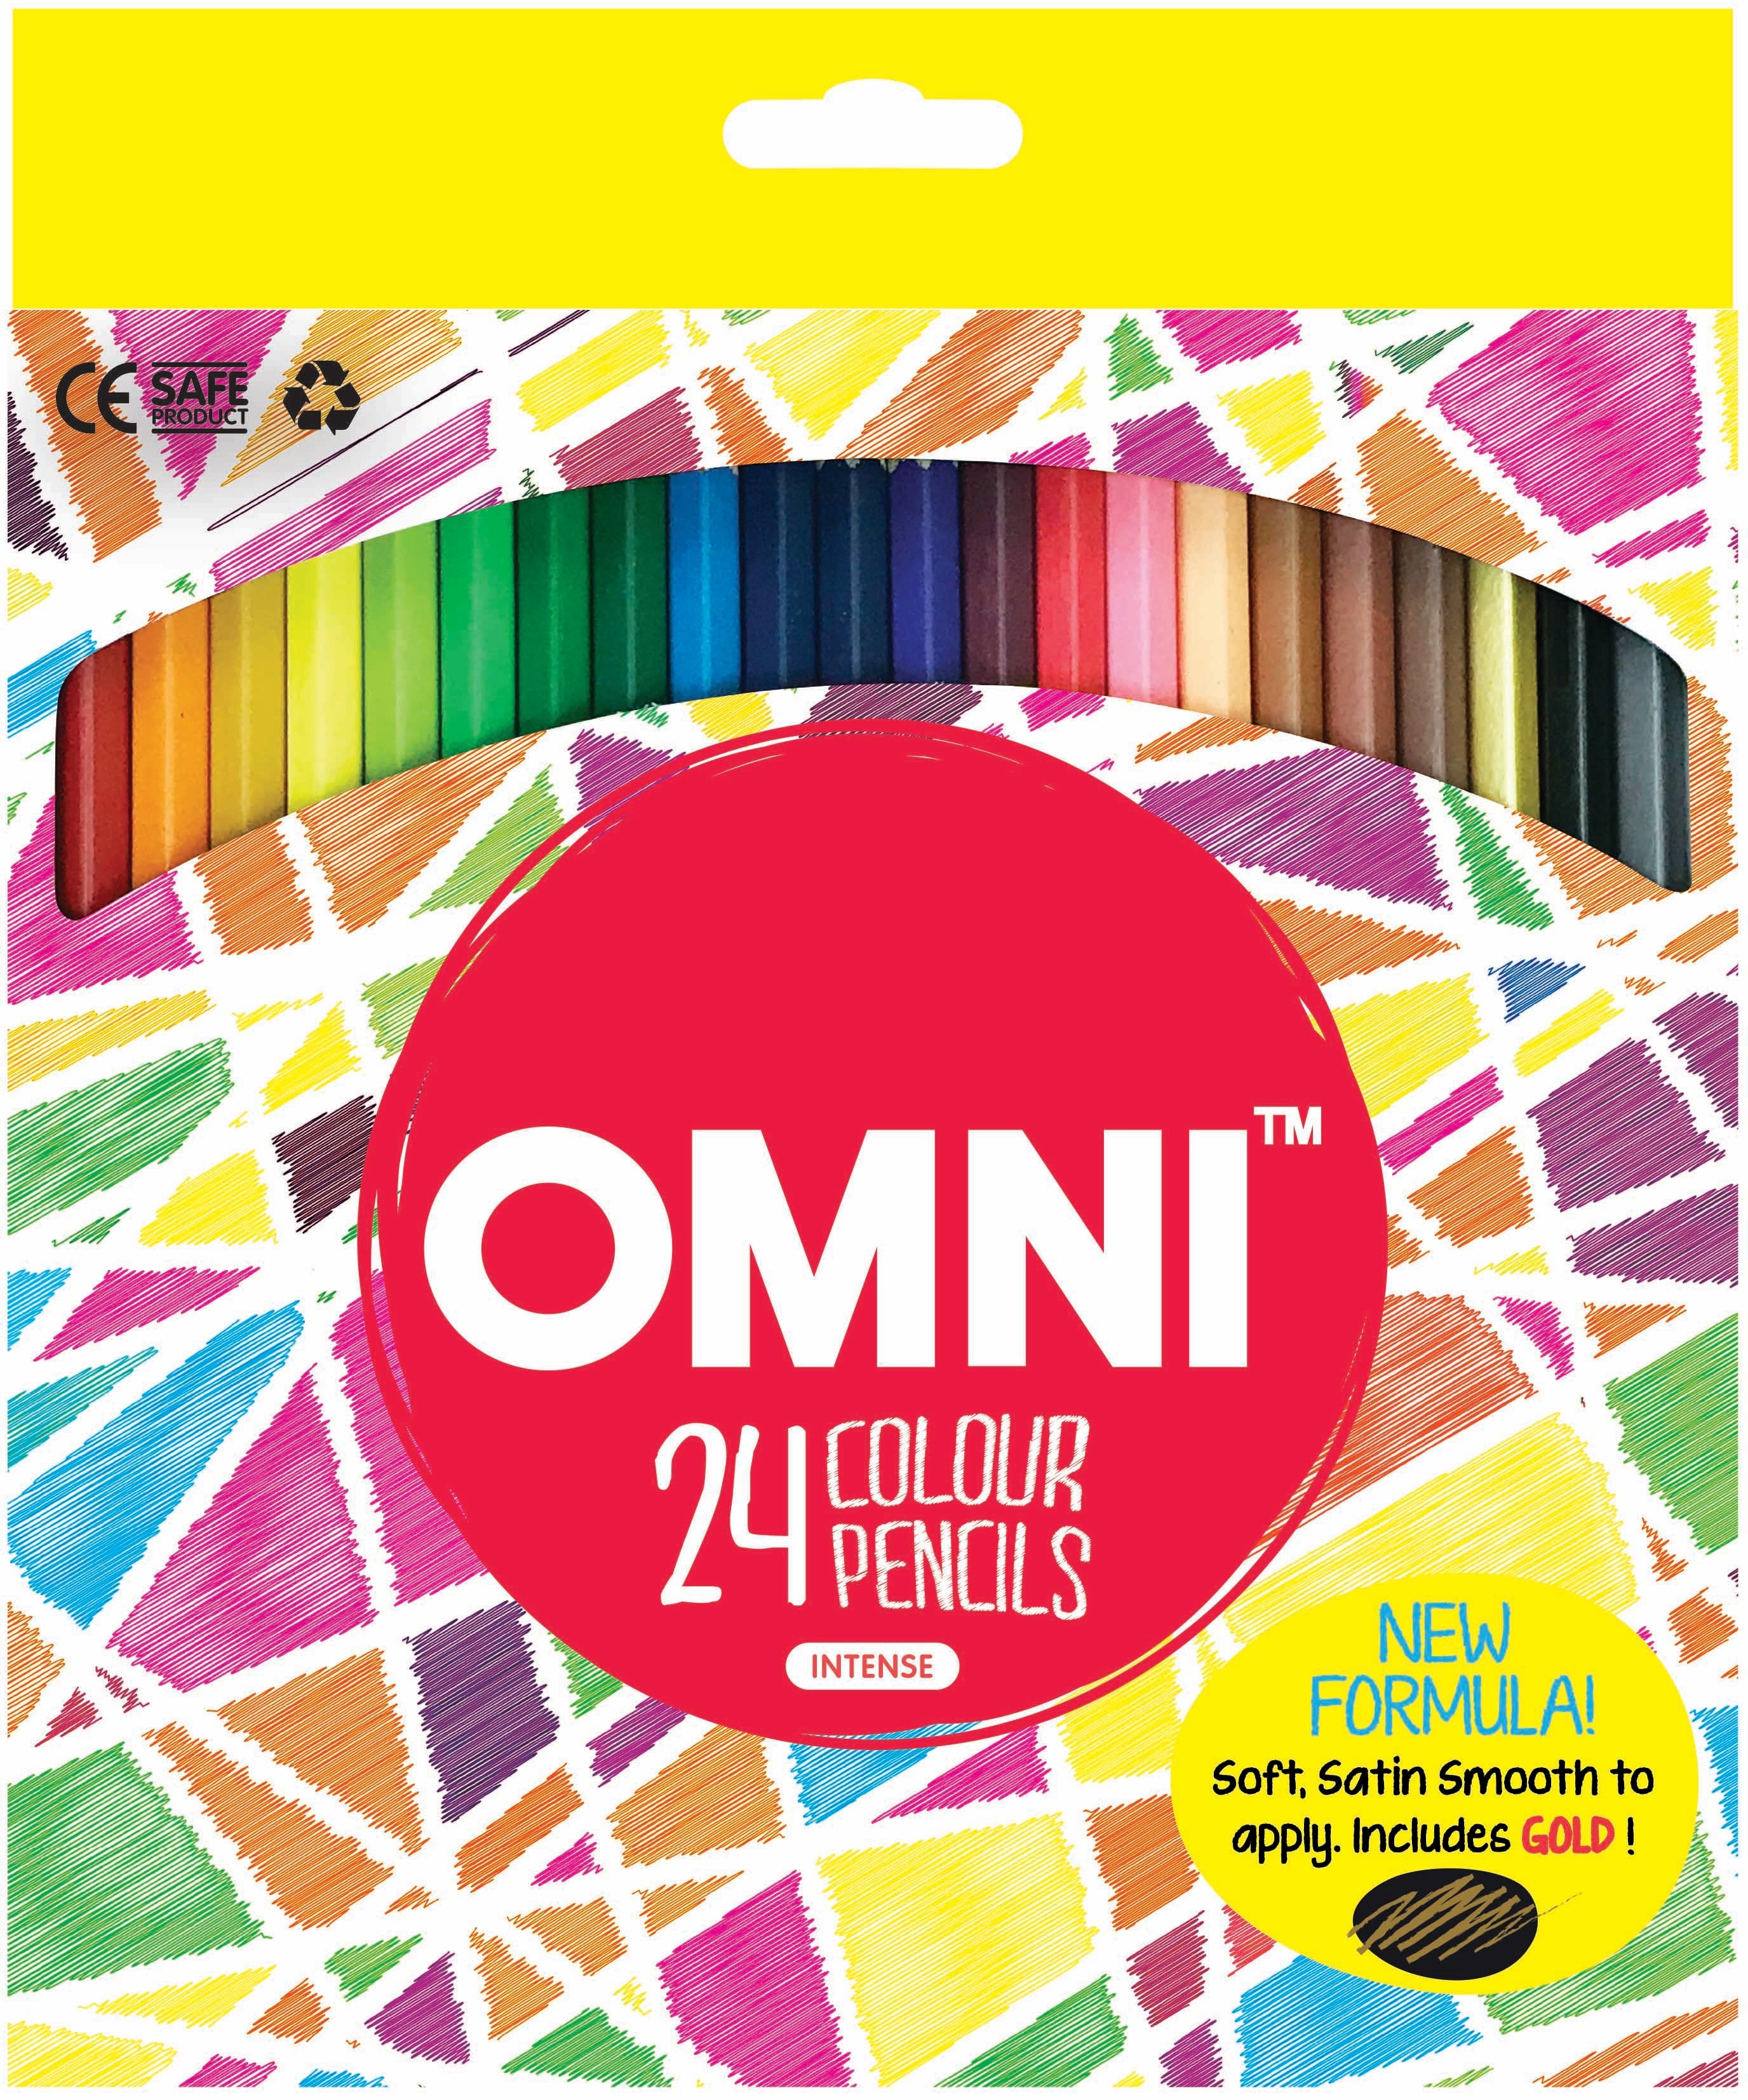 OMNI 24 Intense Colour Pencils with Gold - ART & CRAFT, JULY NEW, OMNI, SALE